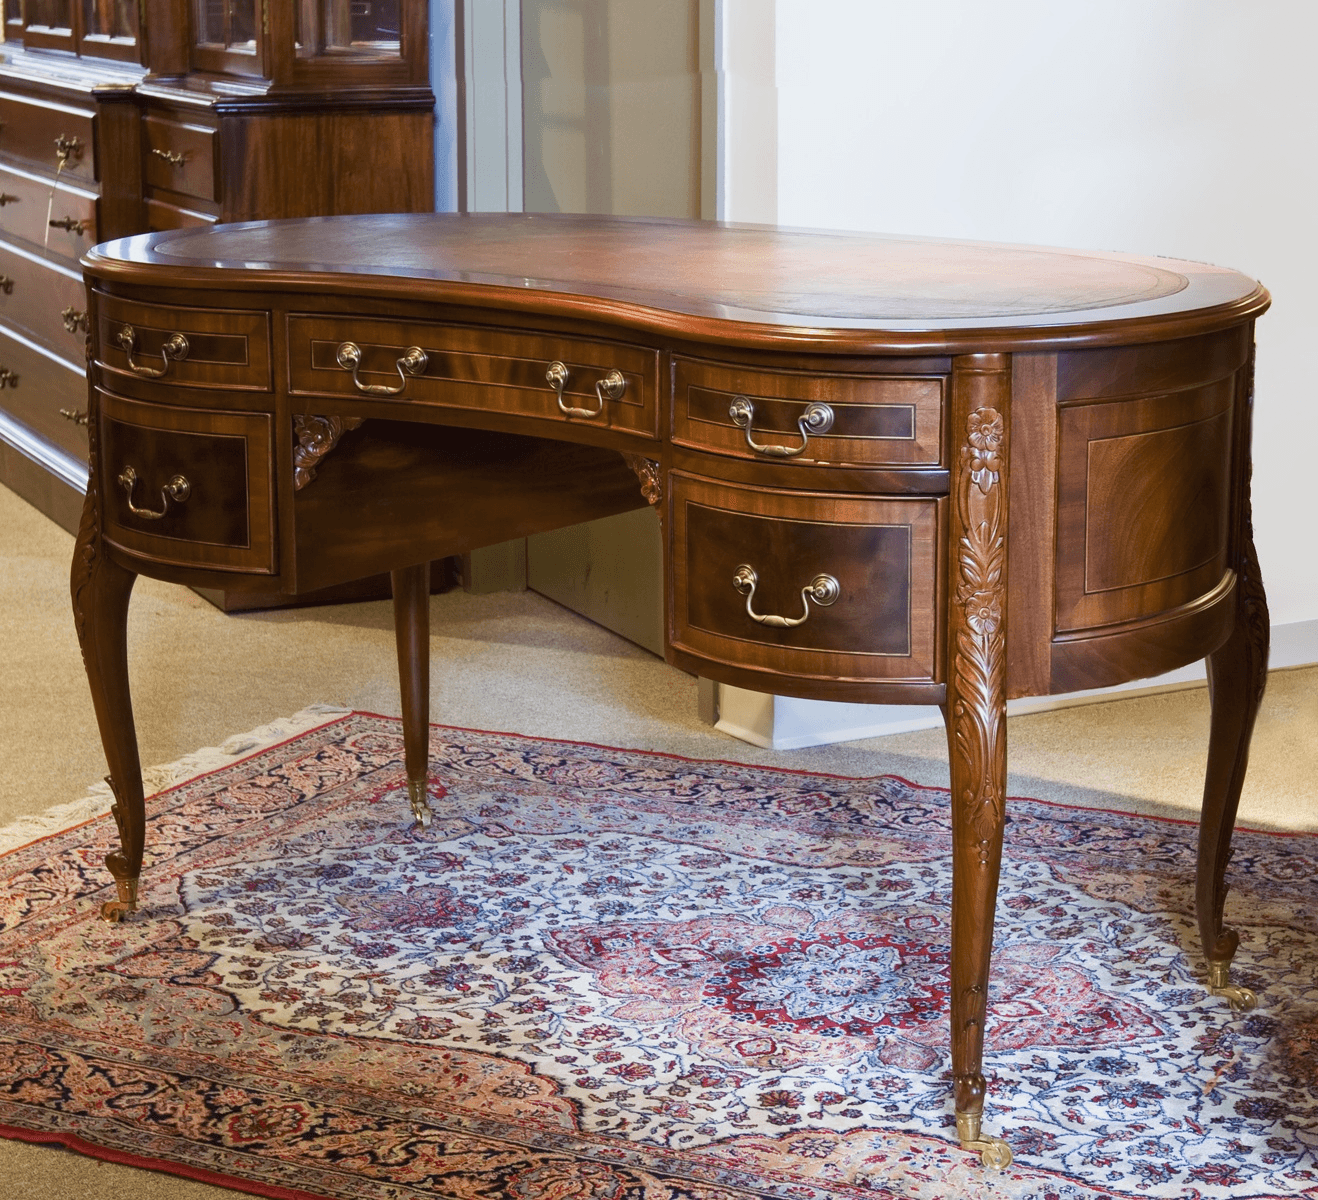 FRENCH STYLE KIDNEY SHAPE DESK - House of Chippendale